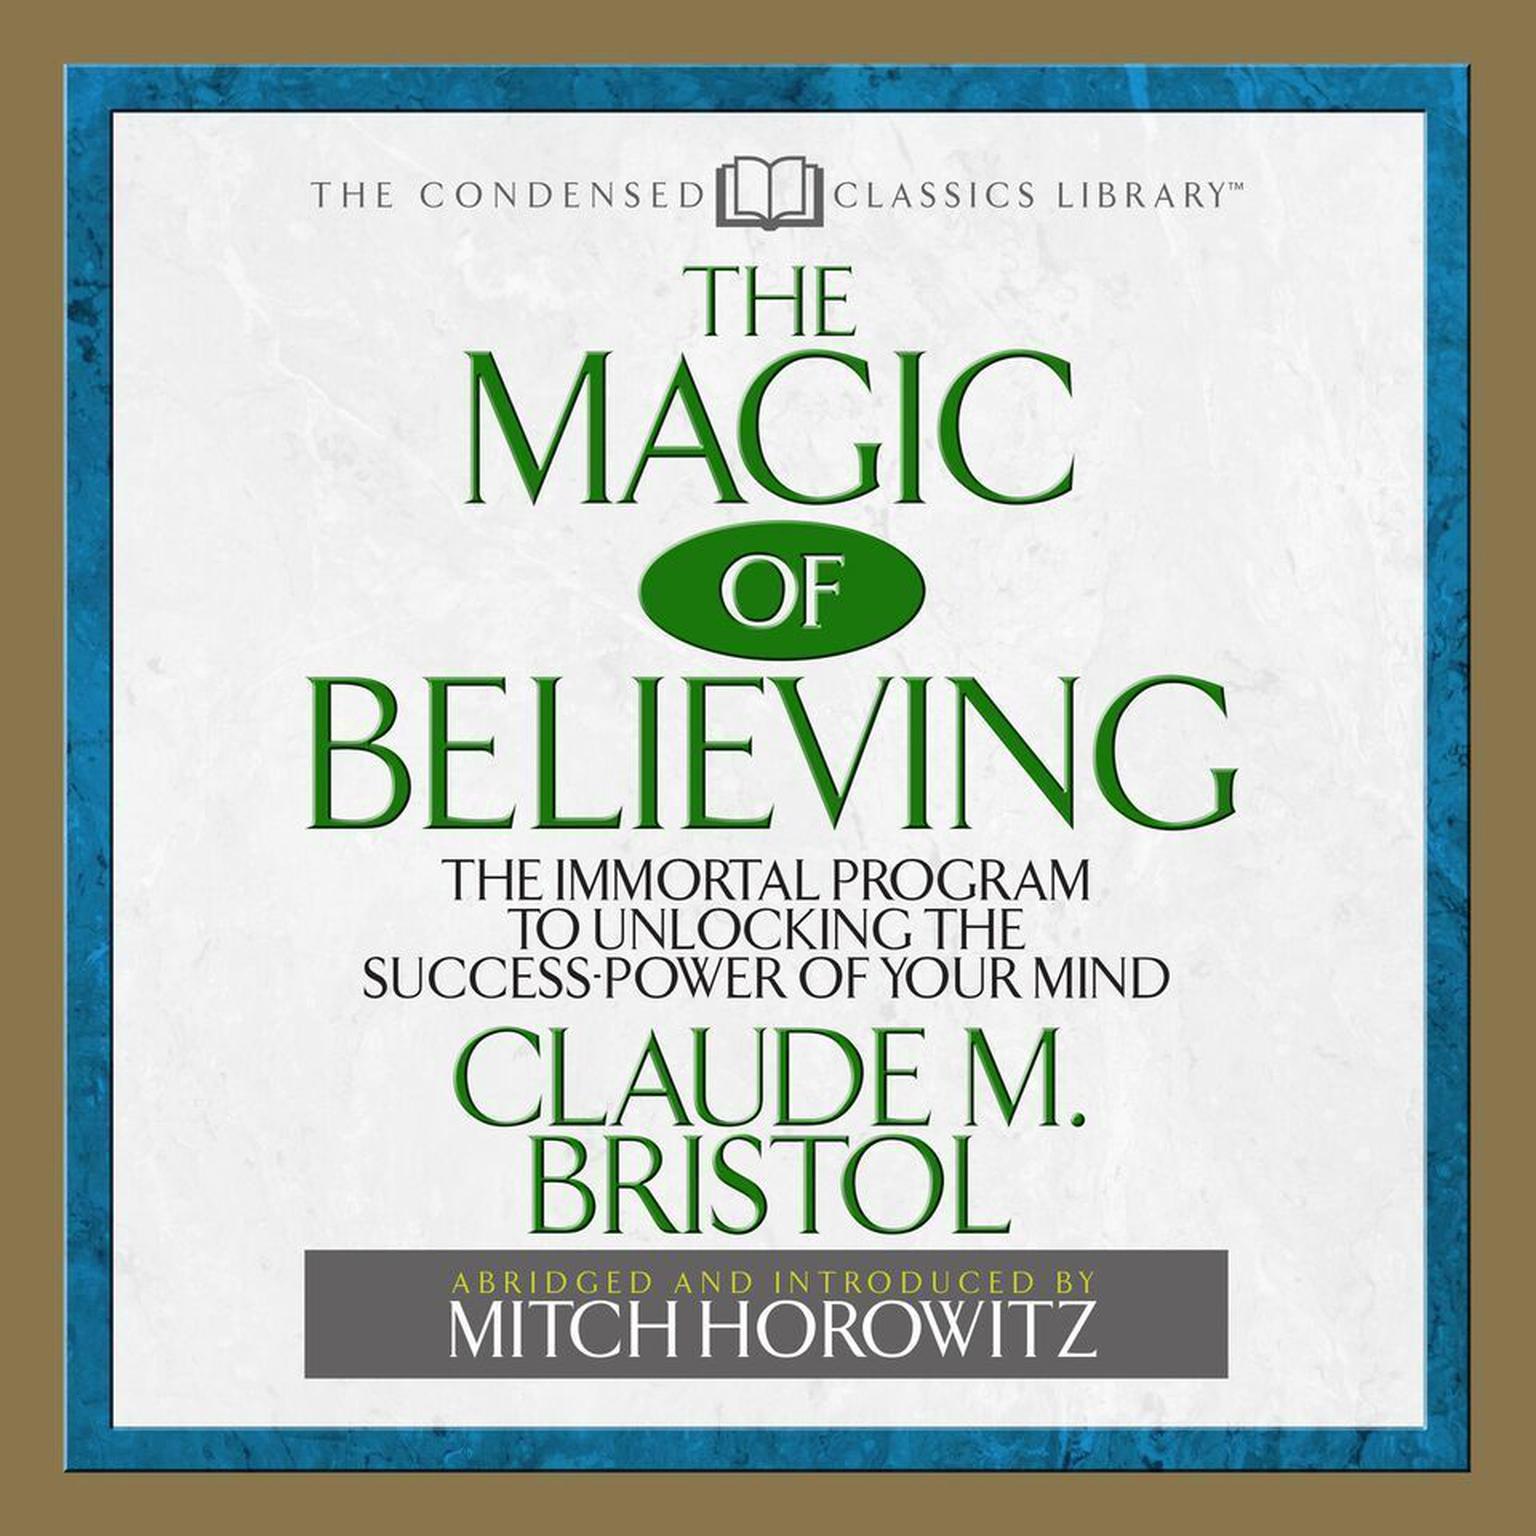 The Magic of Believing (Abridged): The Immortal Program to unlocking the Success Power of Your Mind Audiobook, by Claude Bristol